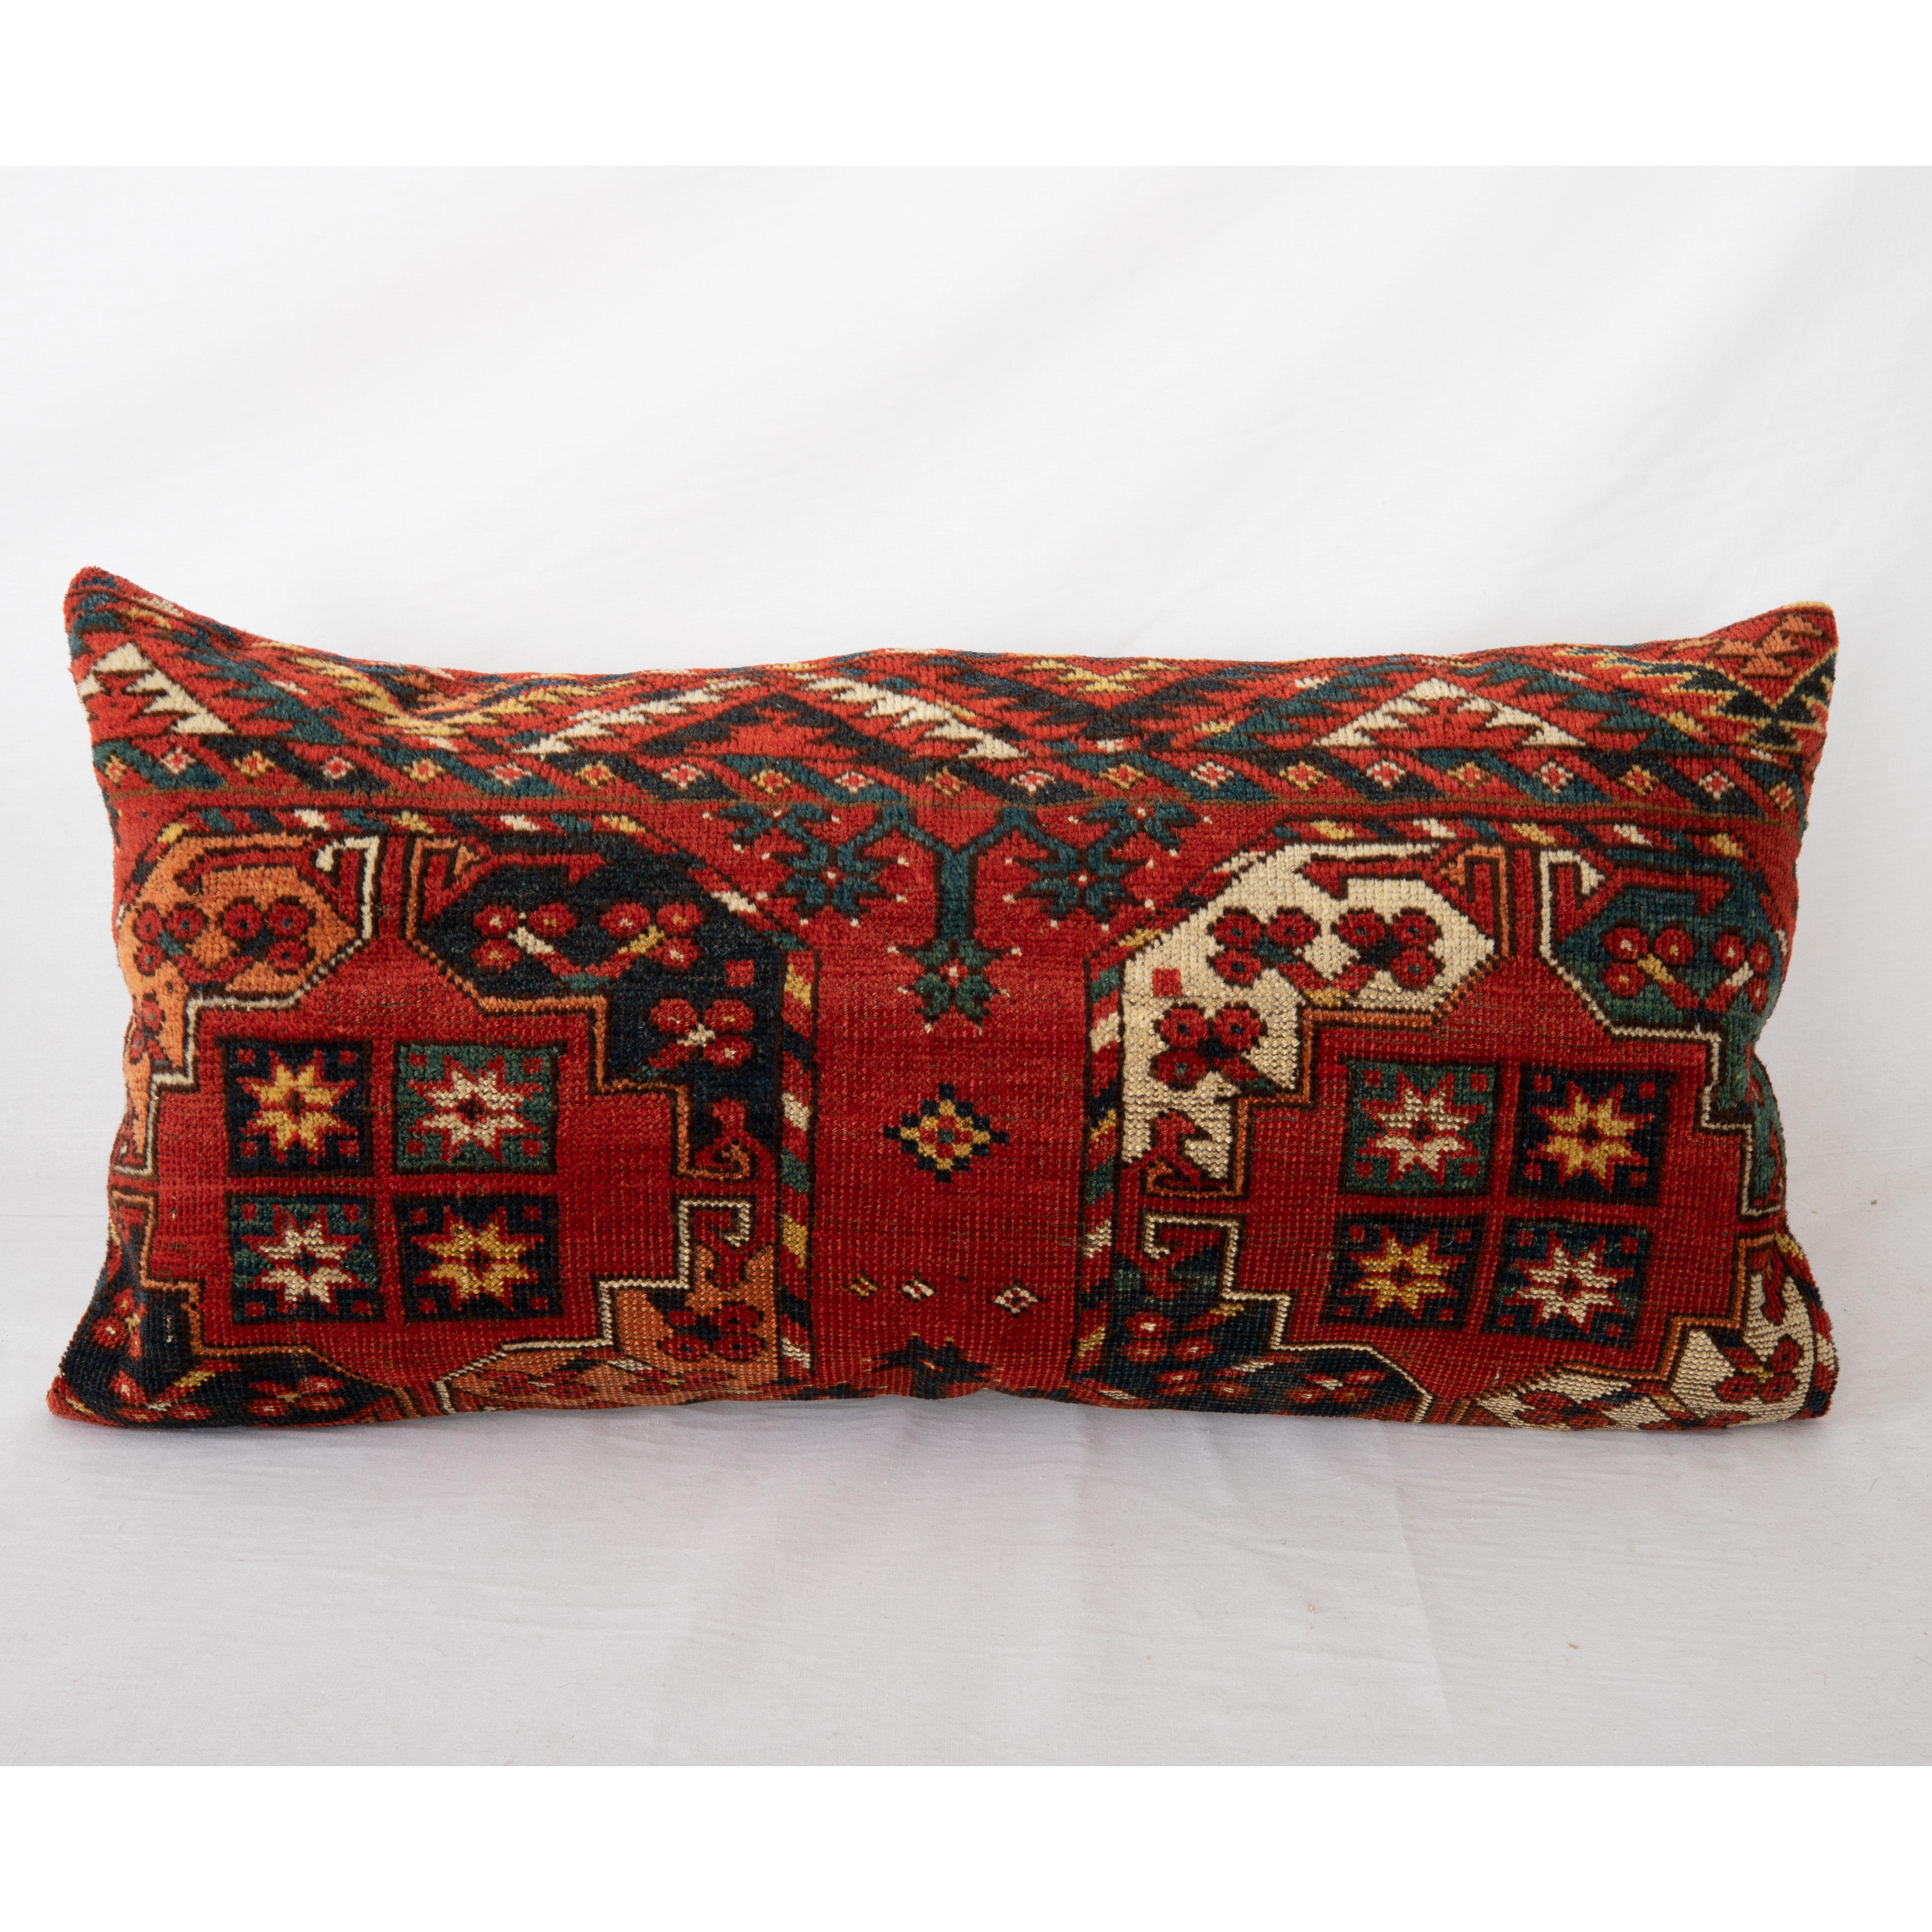 Antique Rug Pillowcase Made from Mid-19th C. Turkmen Ersari Rug Fragment For Sale 2